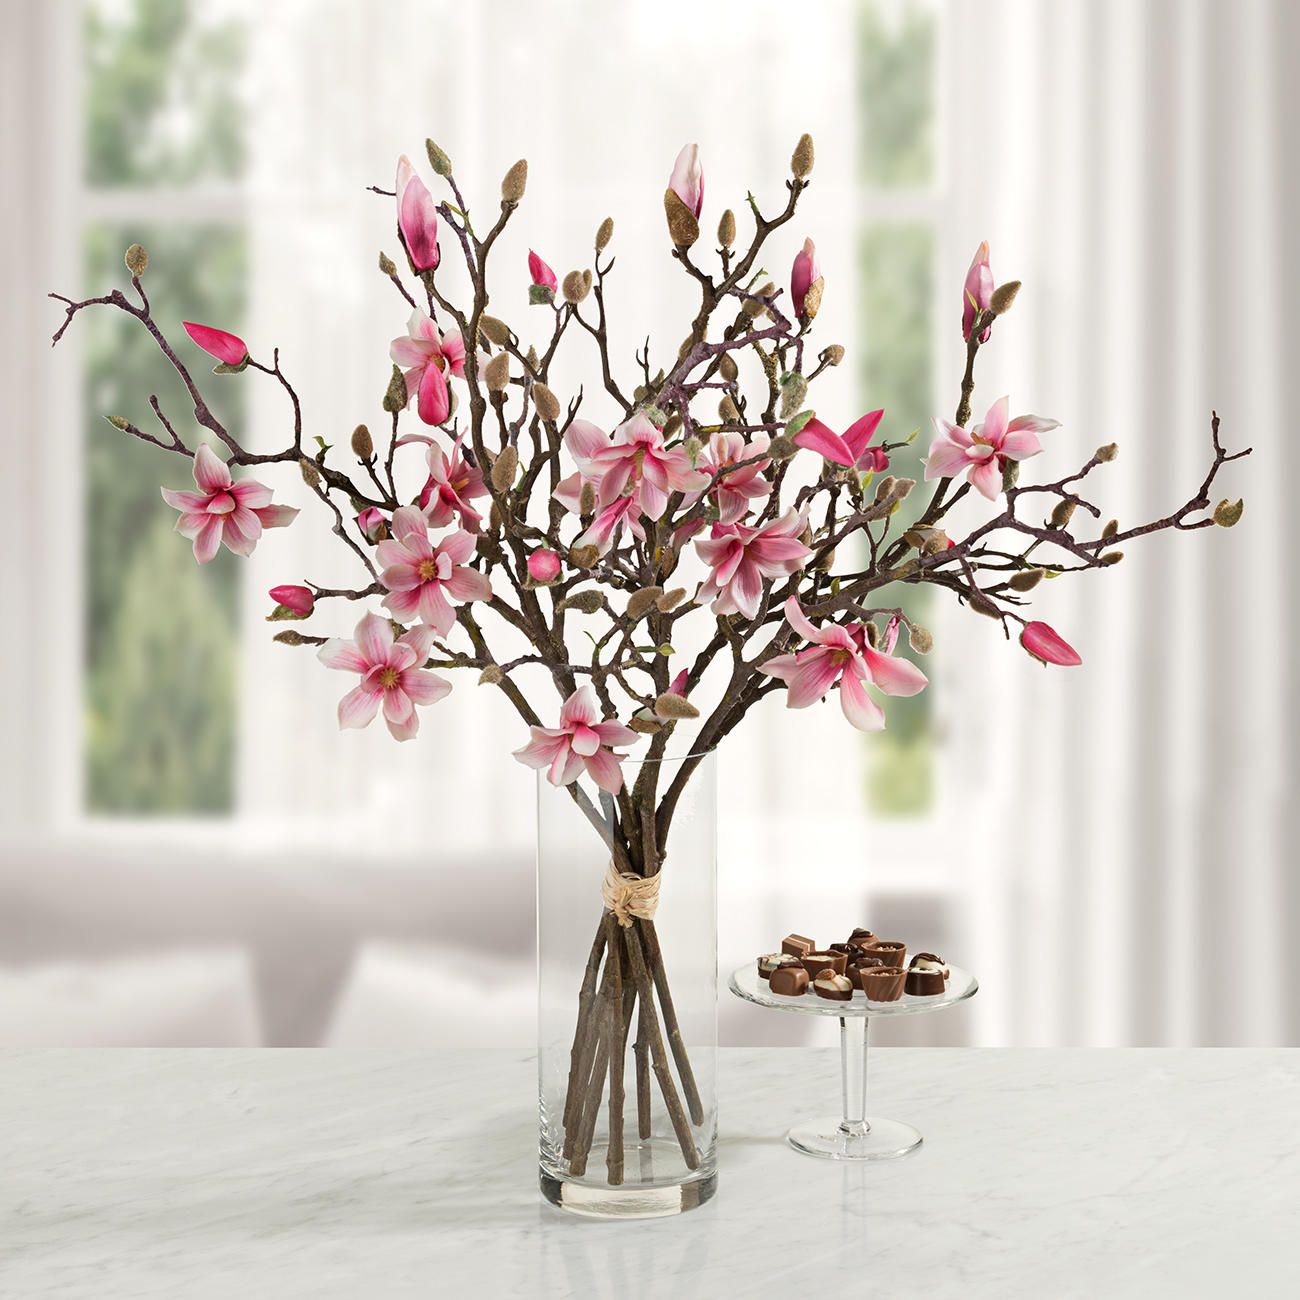 Spring Deco Silk Blossom Magnolia Branch With Vase Green Vase With Flower Stylish Vase With Magnolia